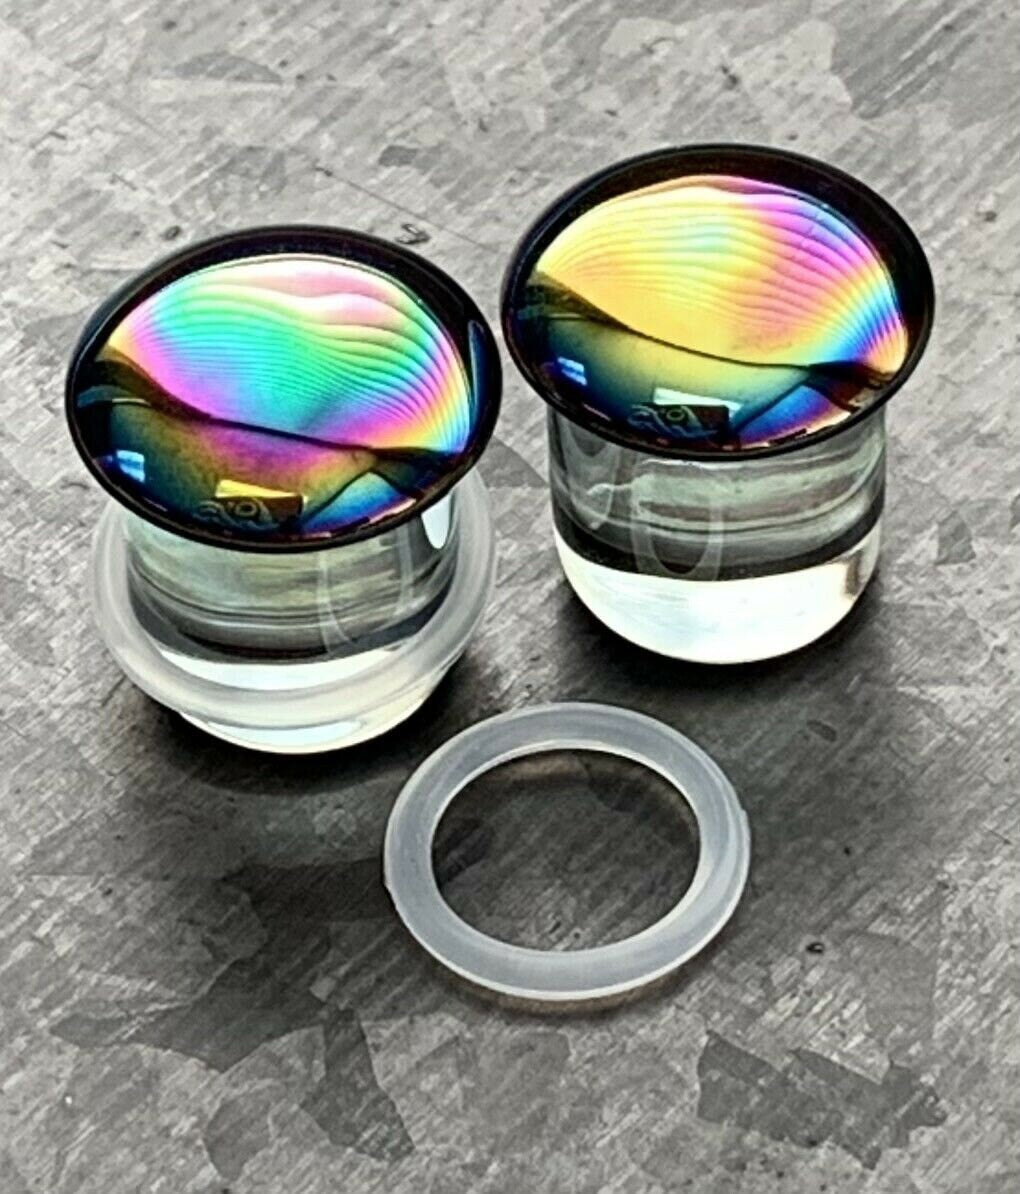 PAIR of Beautiful Oil Slick Design Pyrex Glass Single Flare Plugs with O-Rings - Gauges 4g (5mm) thru 7/8" (22mm) available!